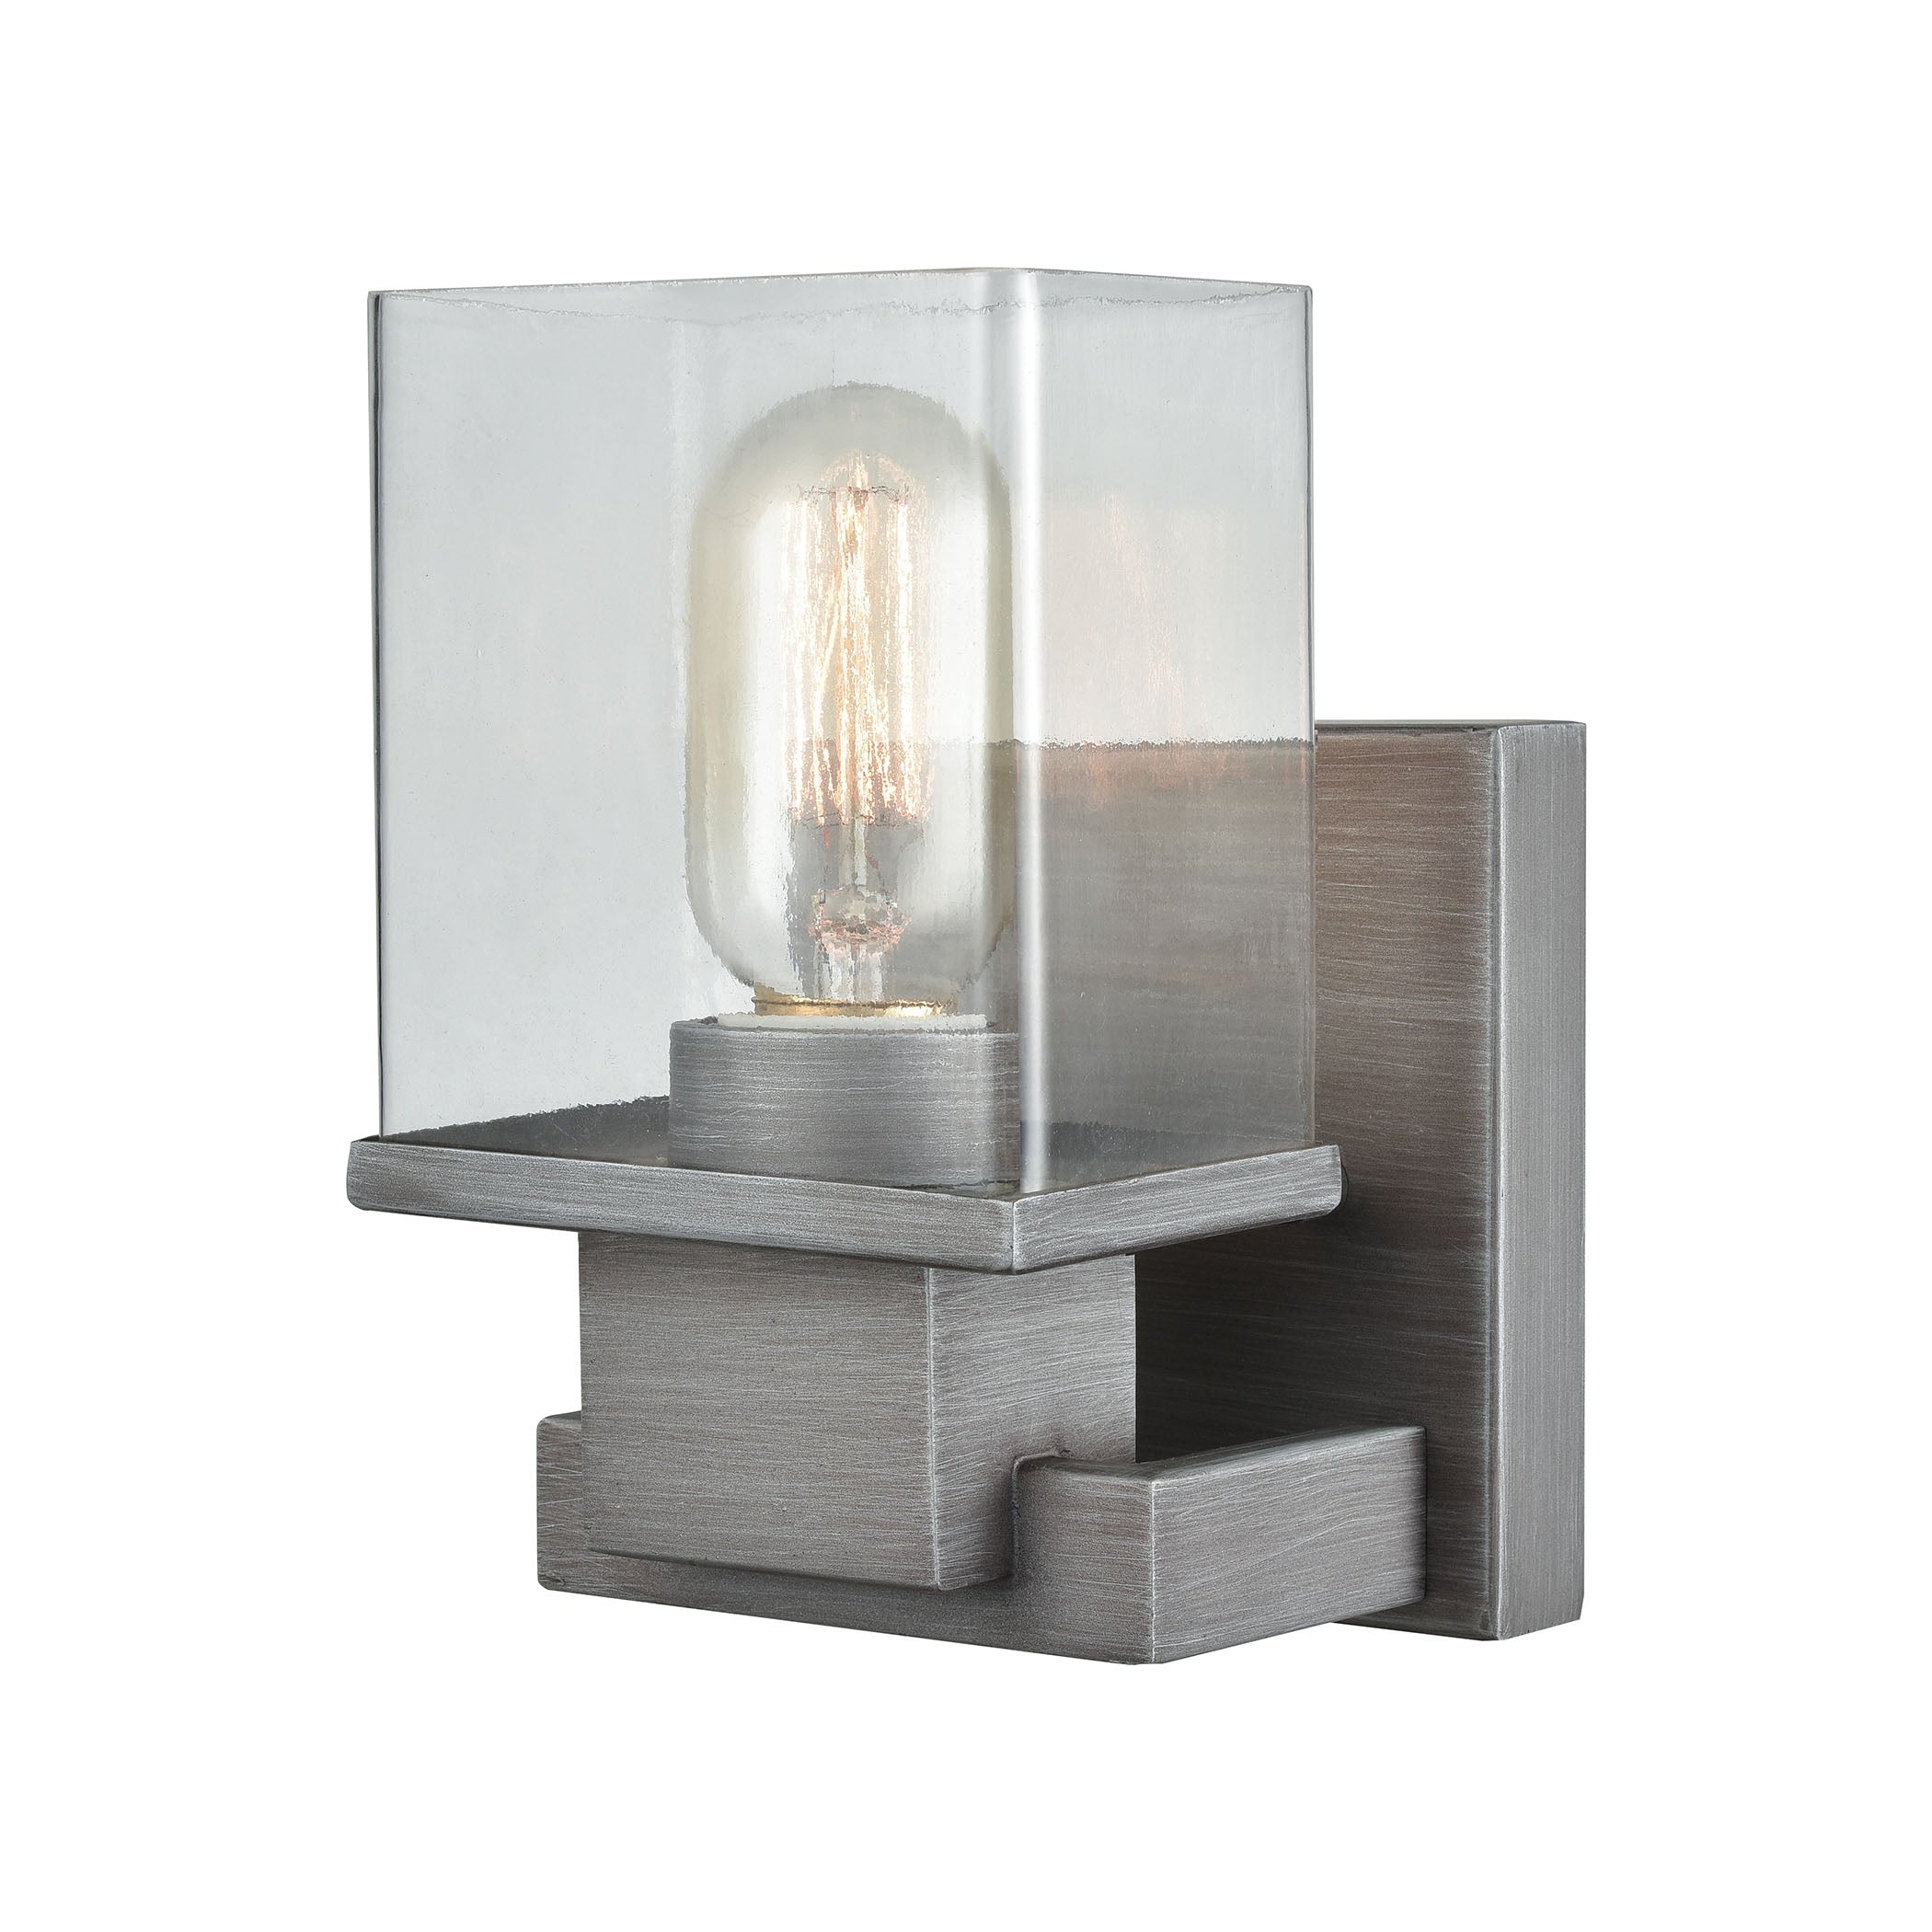 ELK Lighting 11940/1 Hotelier 1-Light Vanity Lamp in Weathered Zinc with Clear Glass